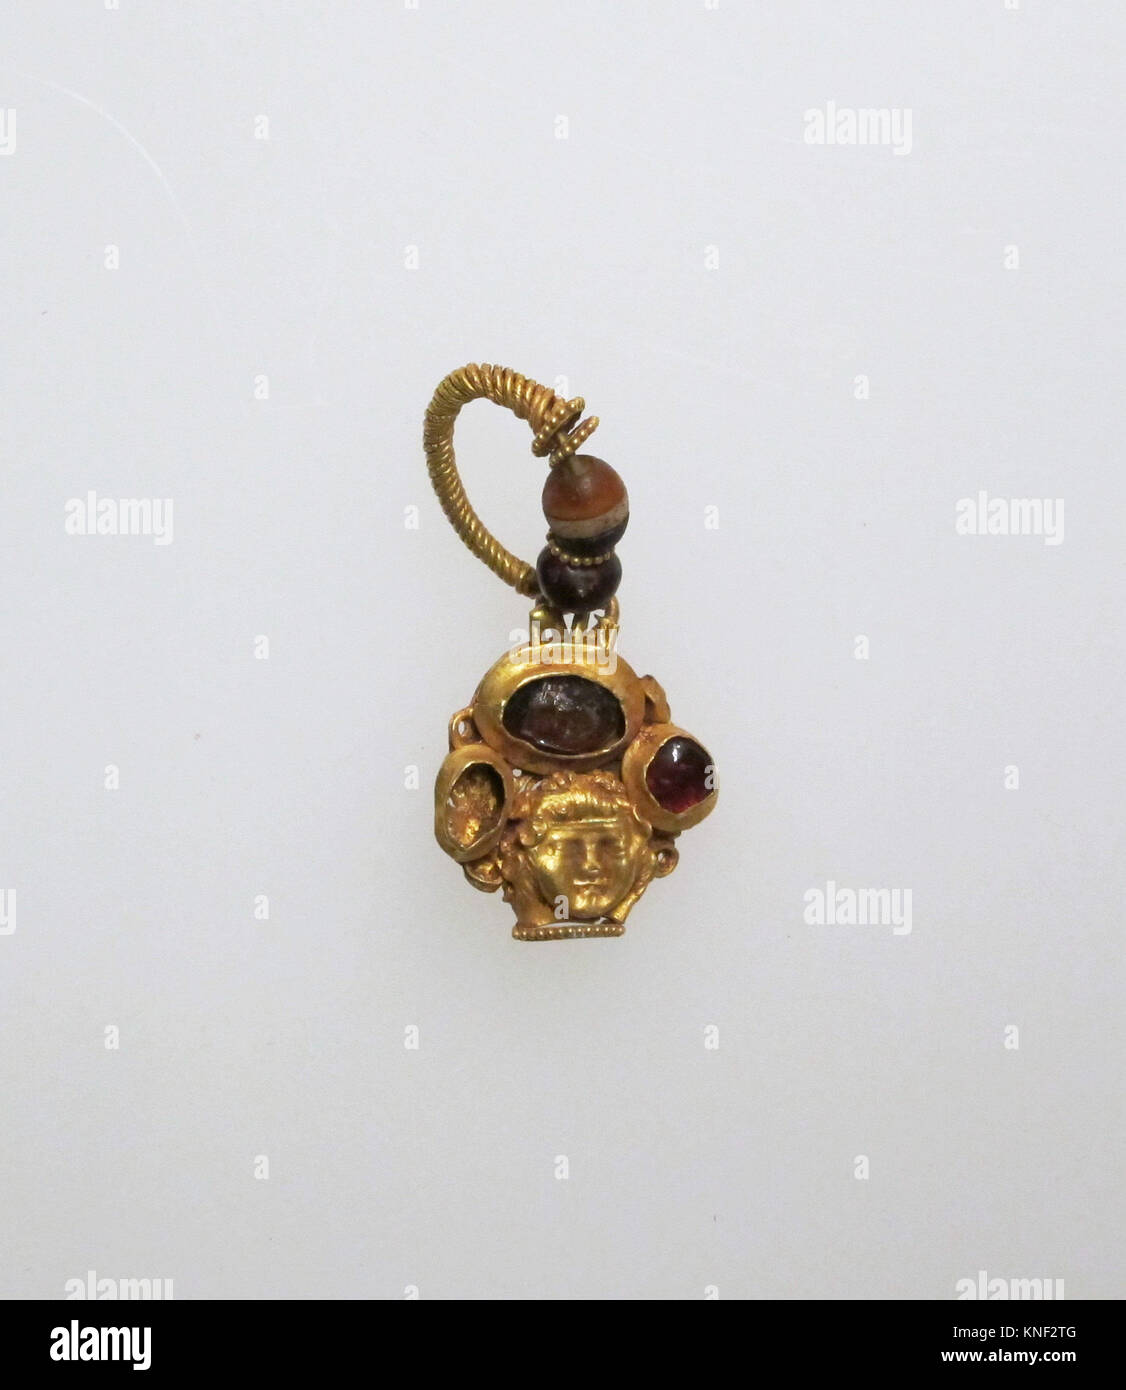 Earring with human face. Date: 1st century B.C.-3rd century A.D; Culture: Roman; Medium: Gold, garnet; Dimensions: Other: 9/16 x 11/16 x 1 1/2 in. Stock Photo